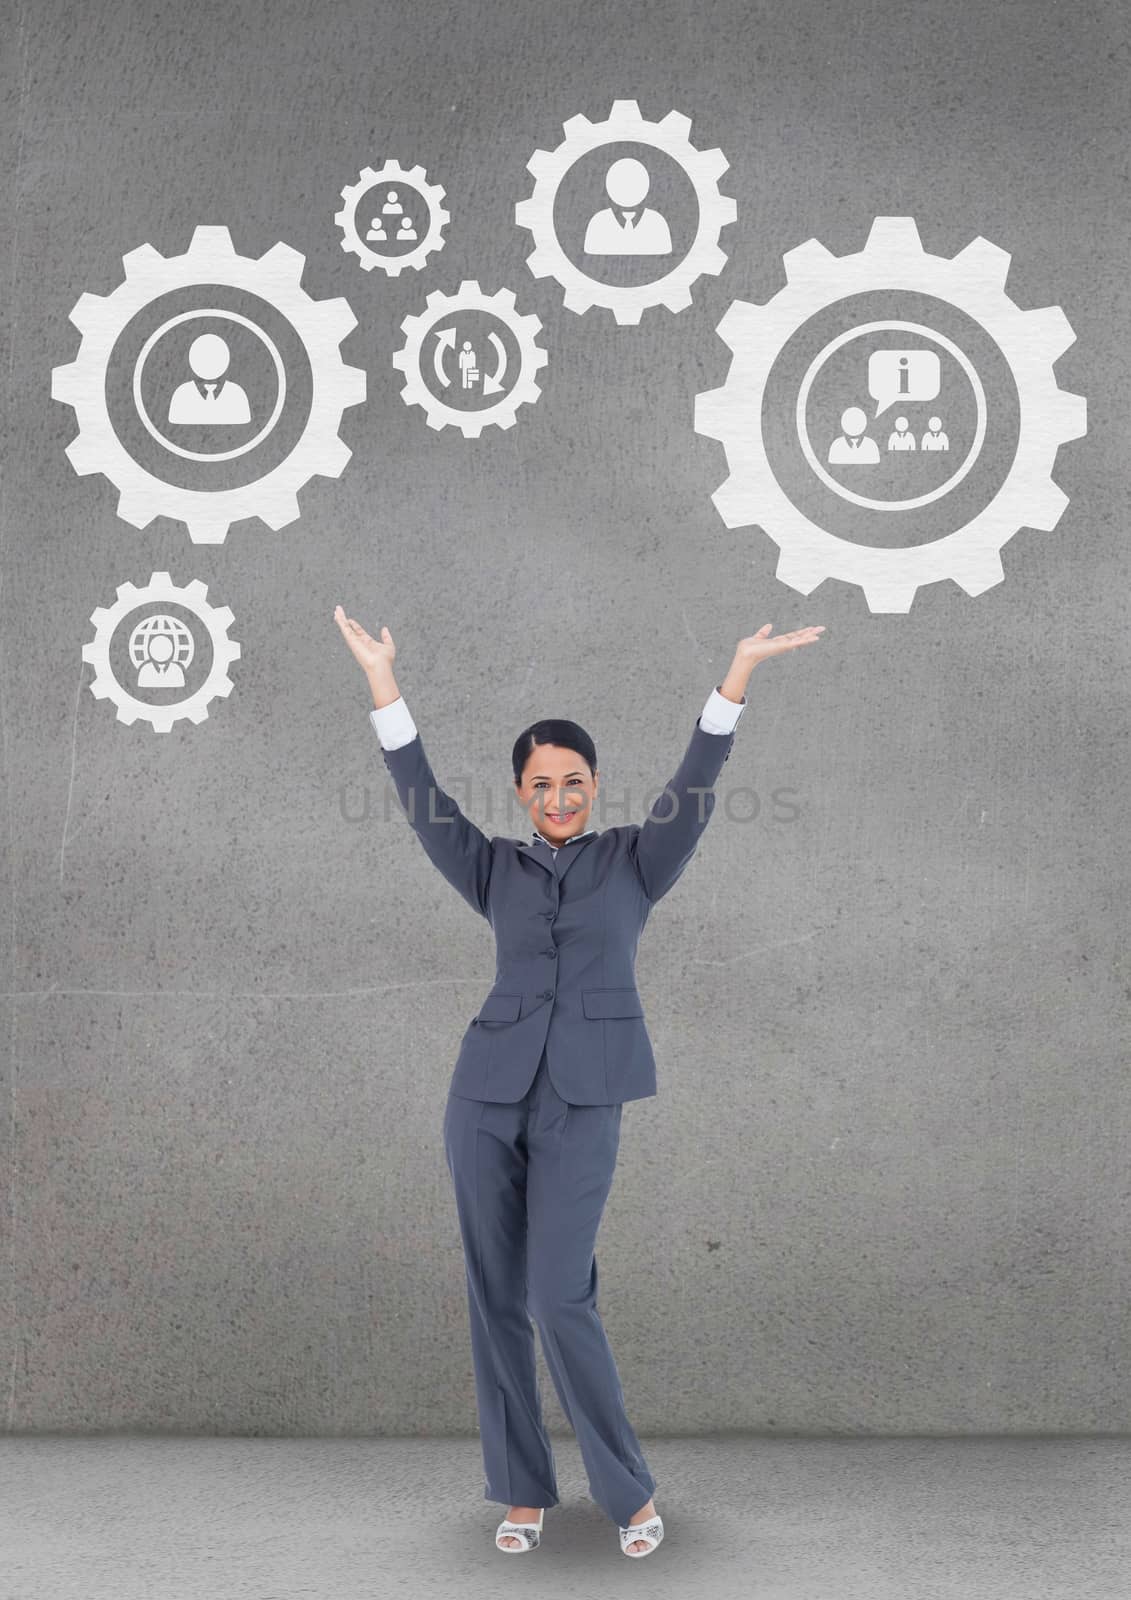 Digital composite of Business woman interacting with people in cogs graphics against grey background